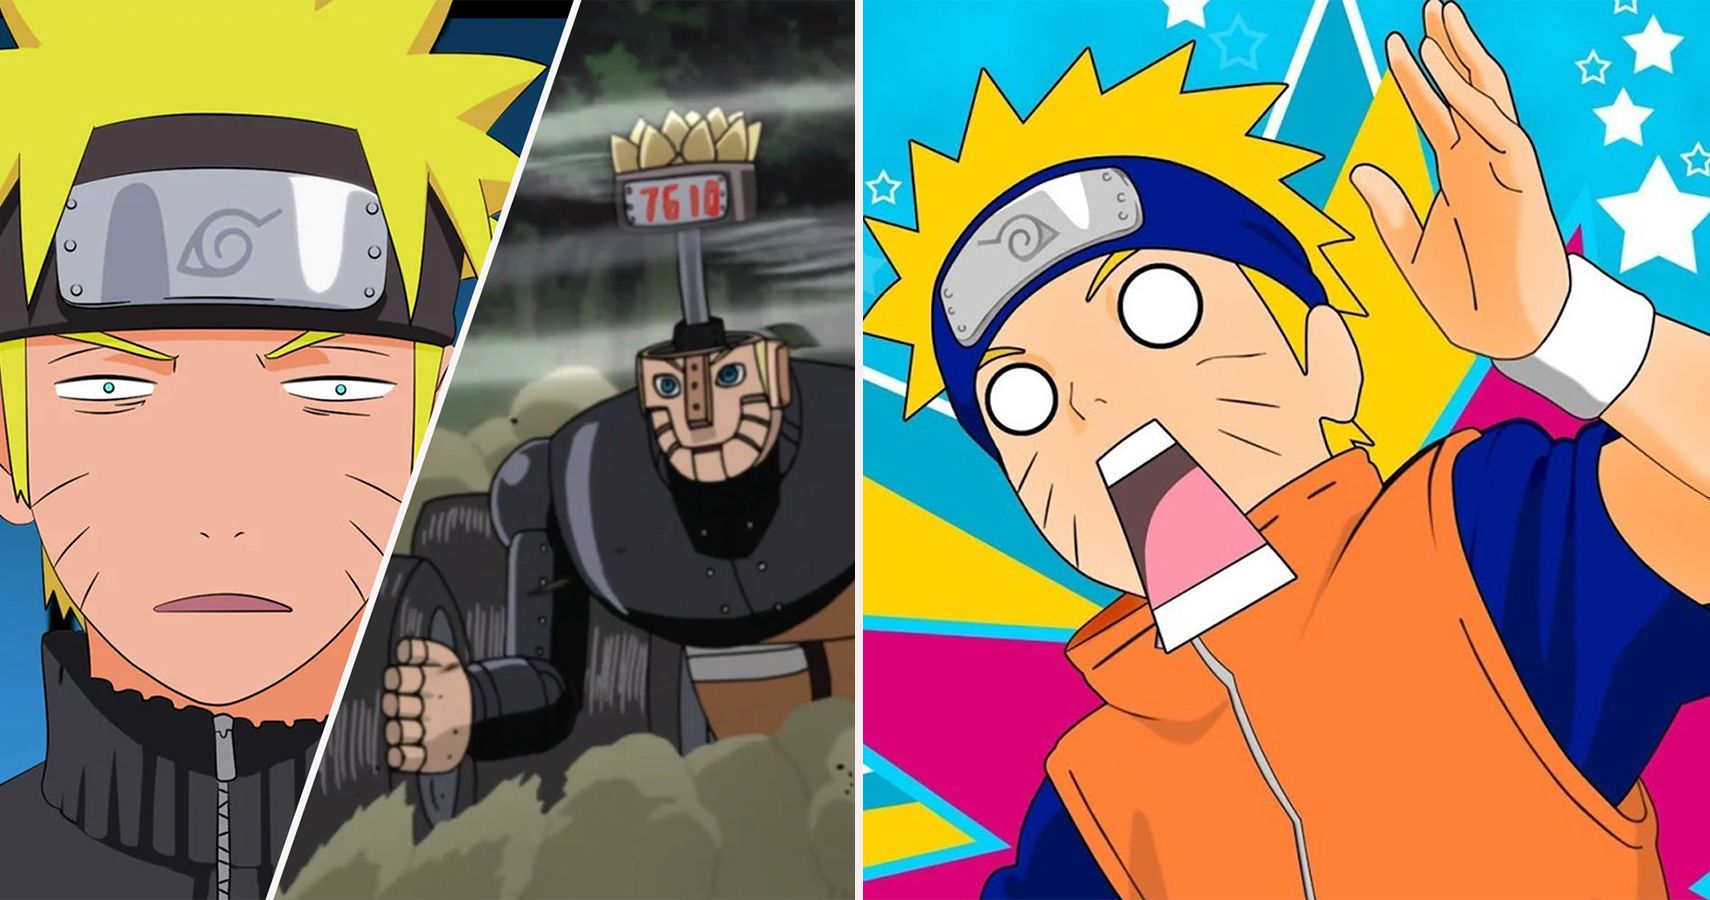 25 Glaring Problems With Naruto Fans Won't Admit